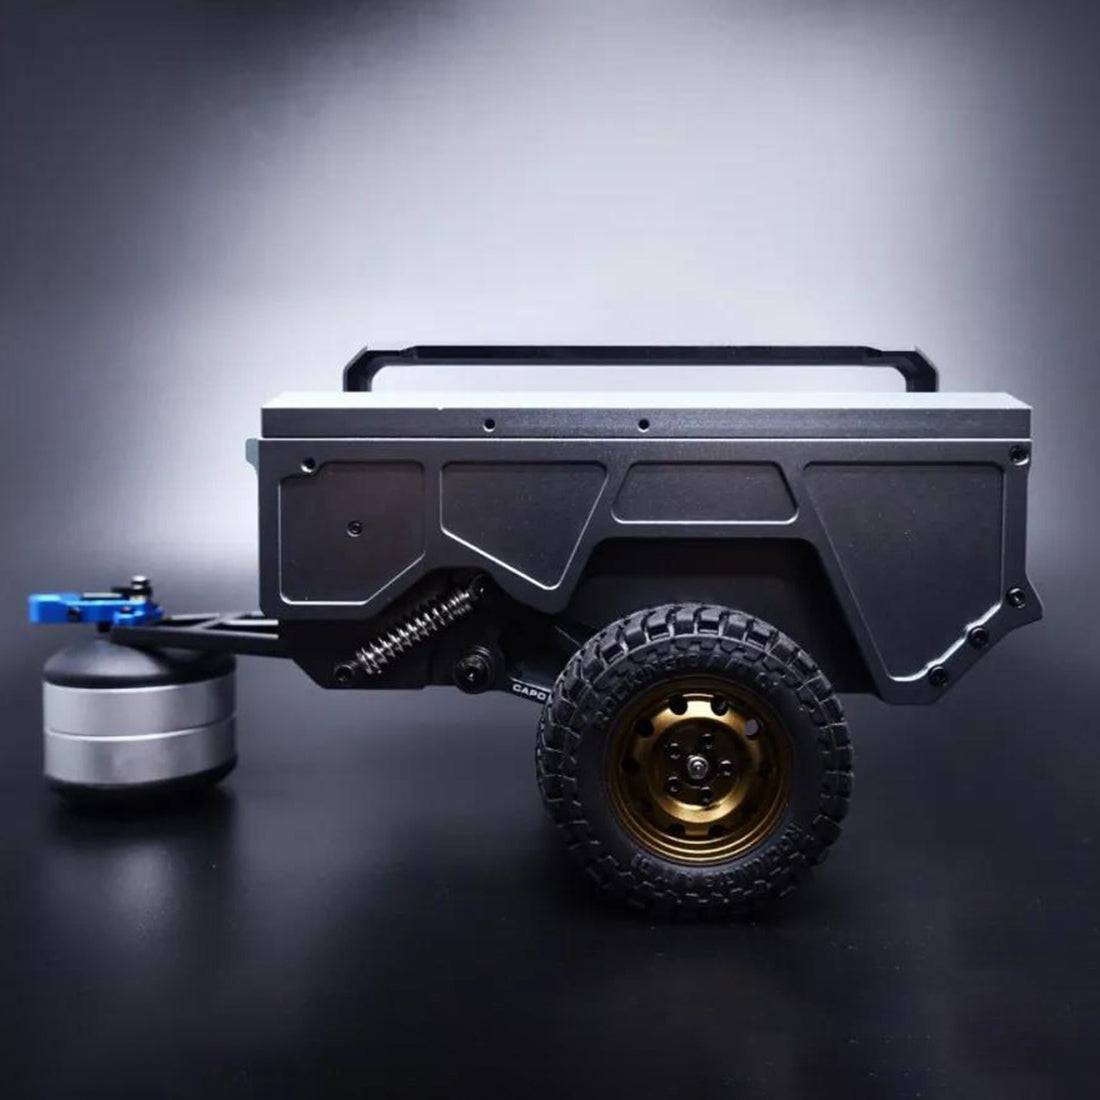 Trailer-A Luggage Trailer for Capo CUB1 1:18 RC Off-road Vehicle Crawler - Stirlingkit